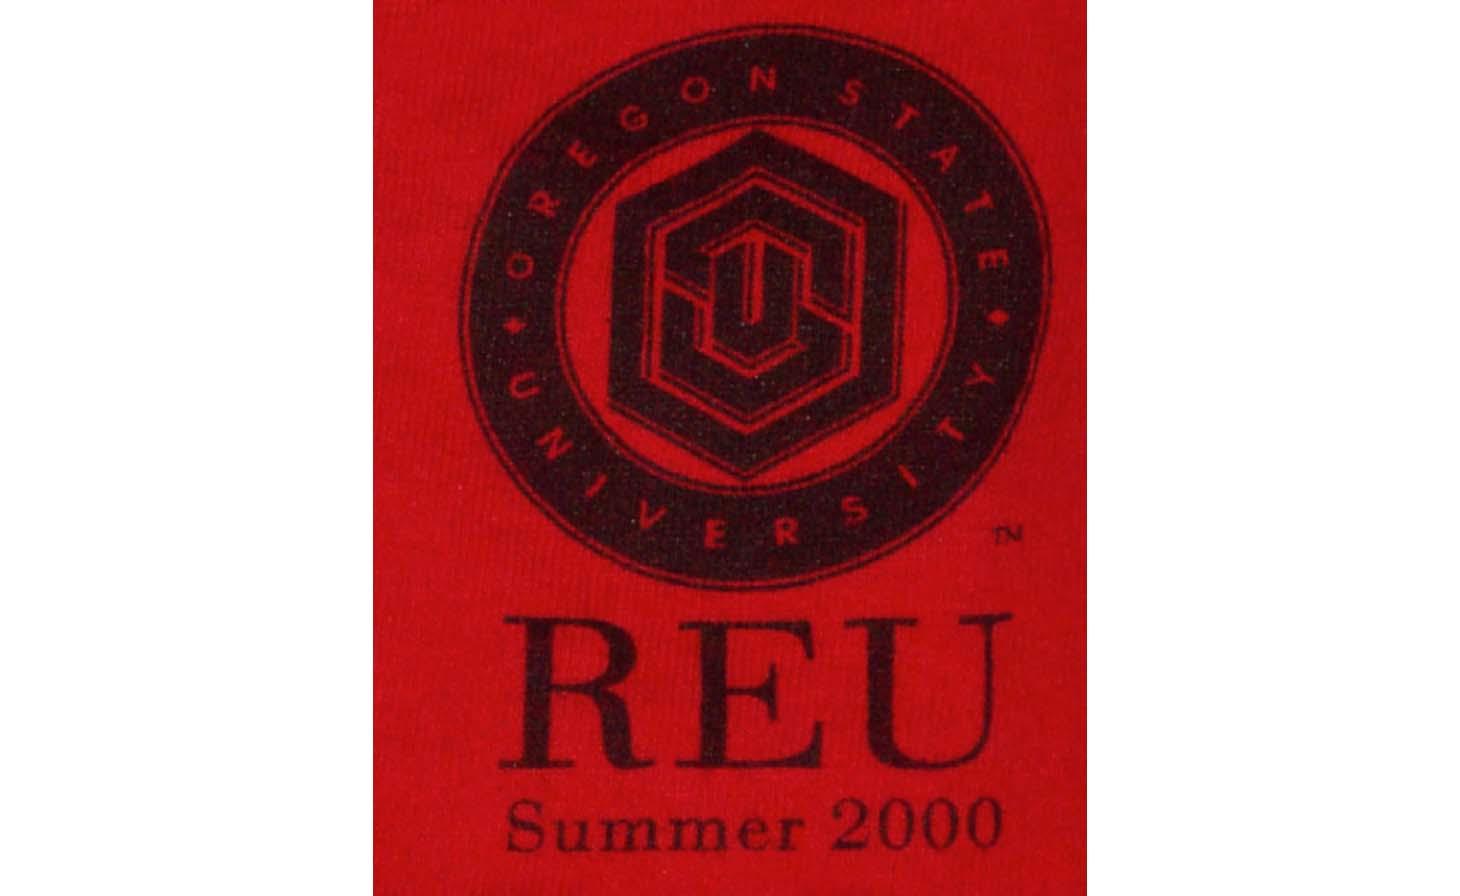 The front image of the OSU REU t shirt in 2000.